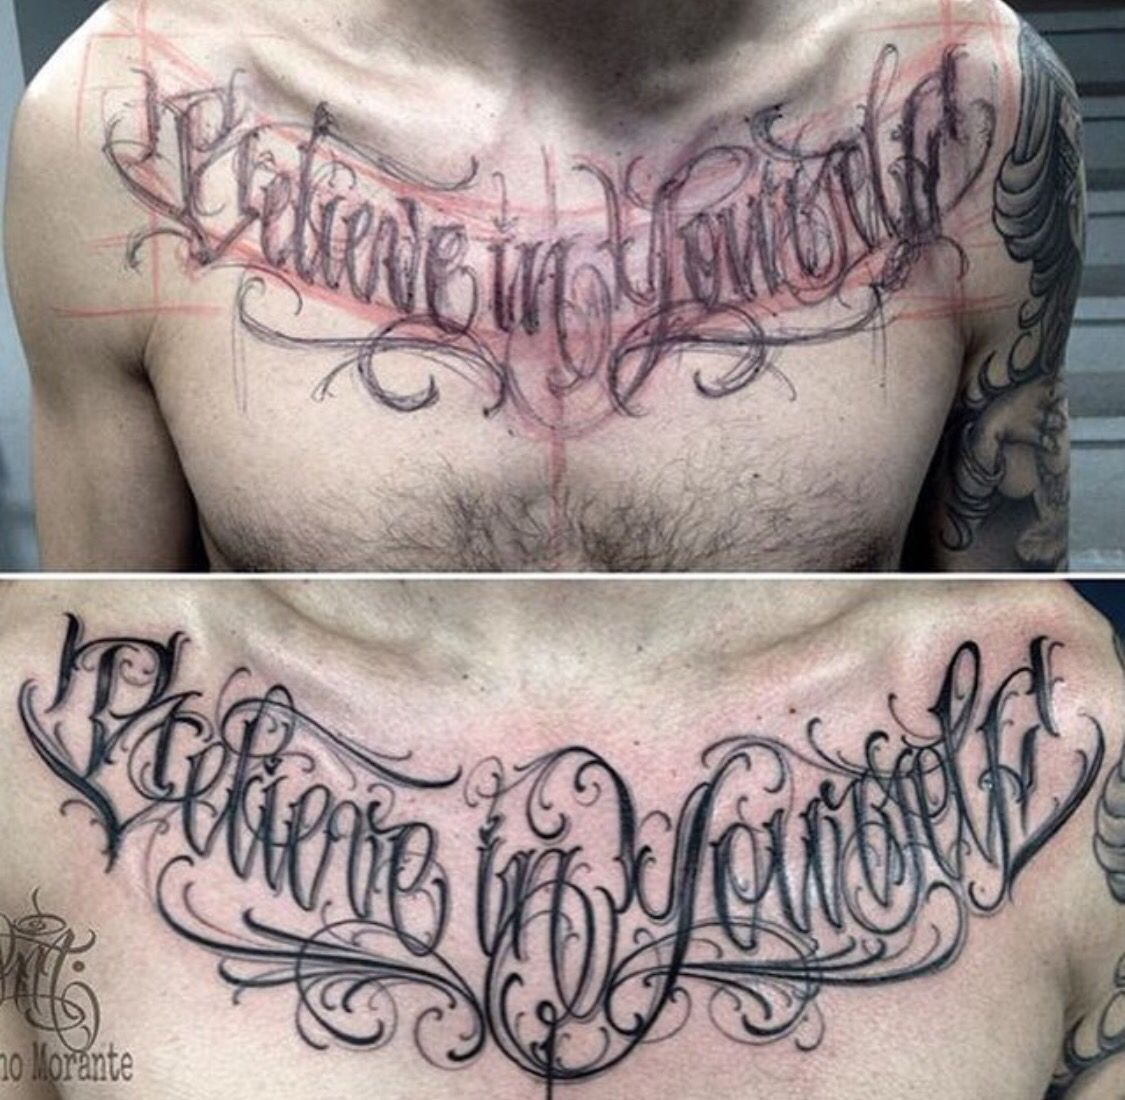 Believe In Yourself Chest Lettering Tattoo Tattoo Envy Tatuagem within sizing 1125 X 1100